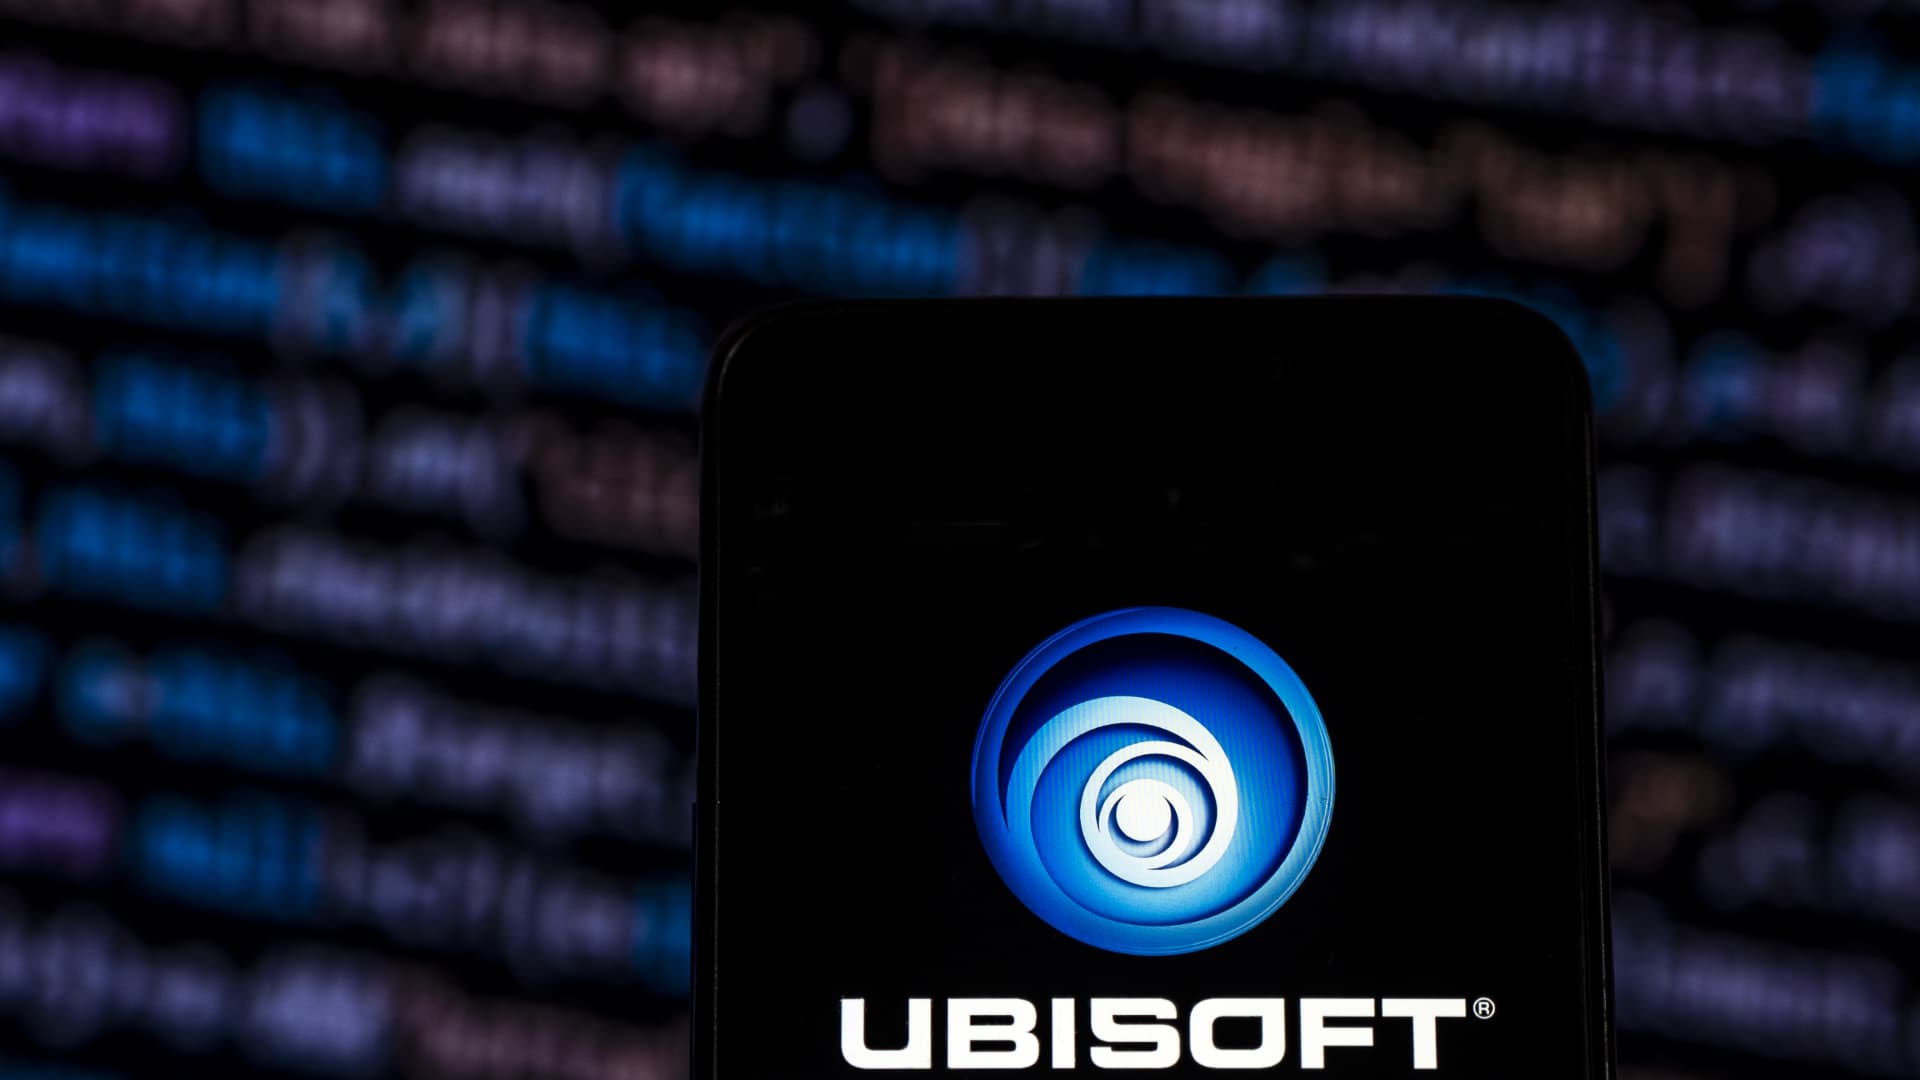 Assassin’s Creed maker Ubisoft sinks to more than seven-year low after slashing guidance, cancelling games